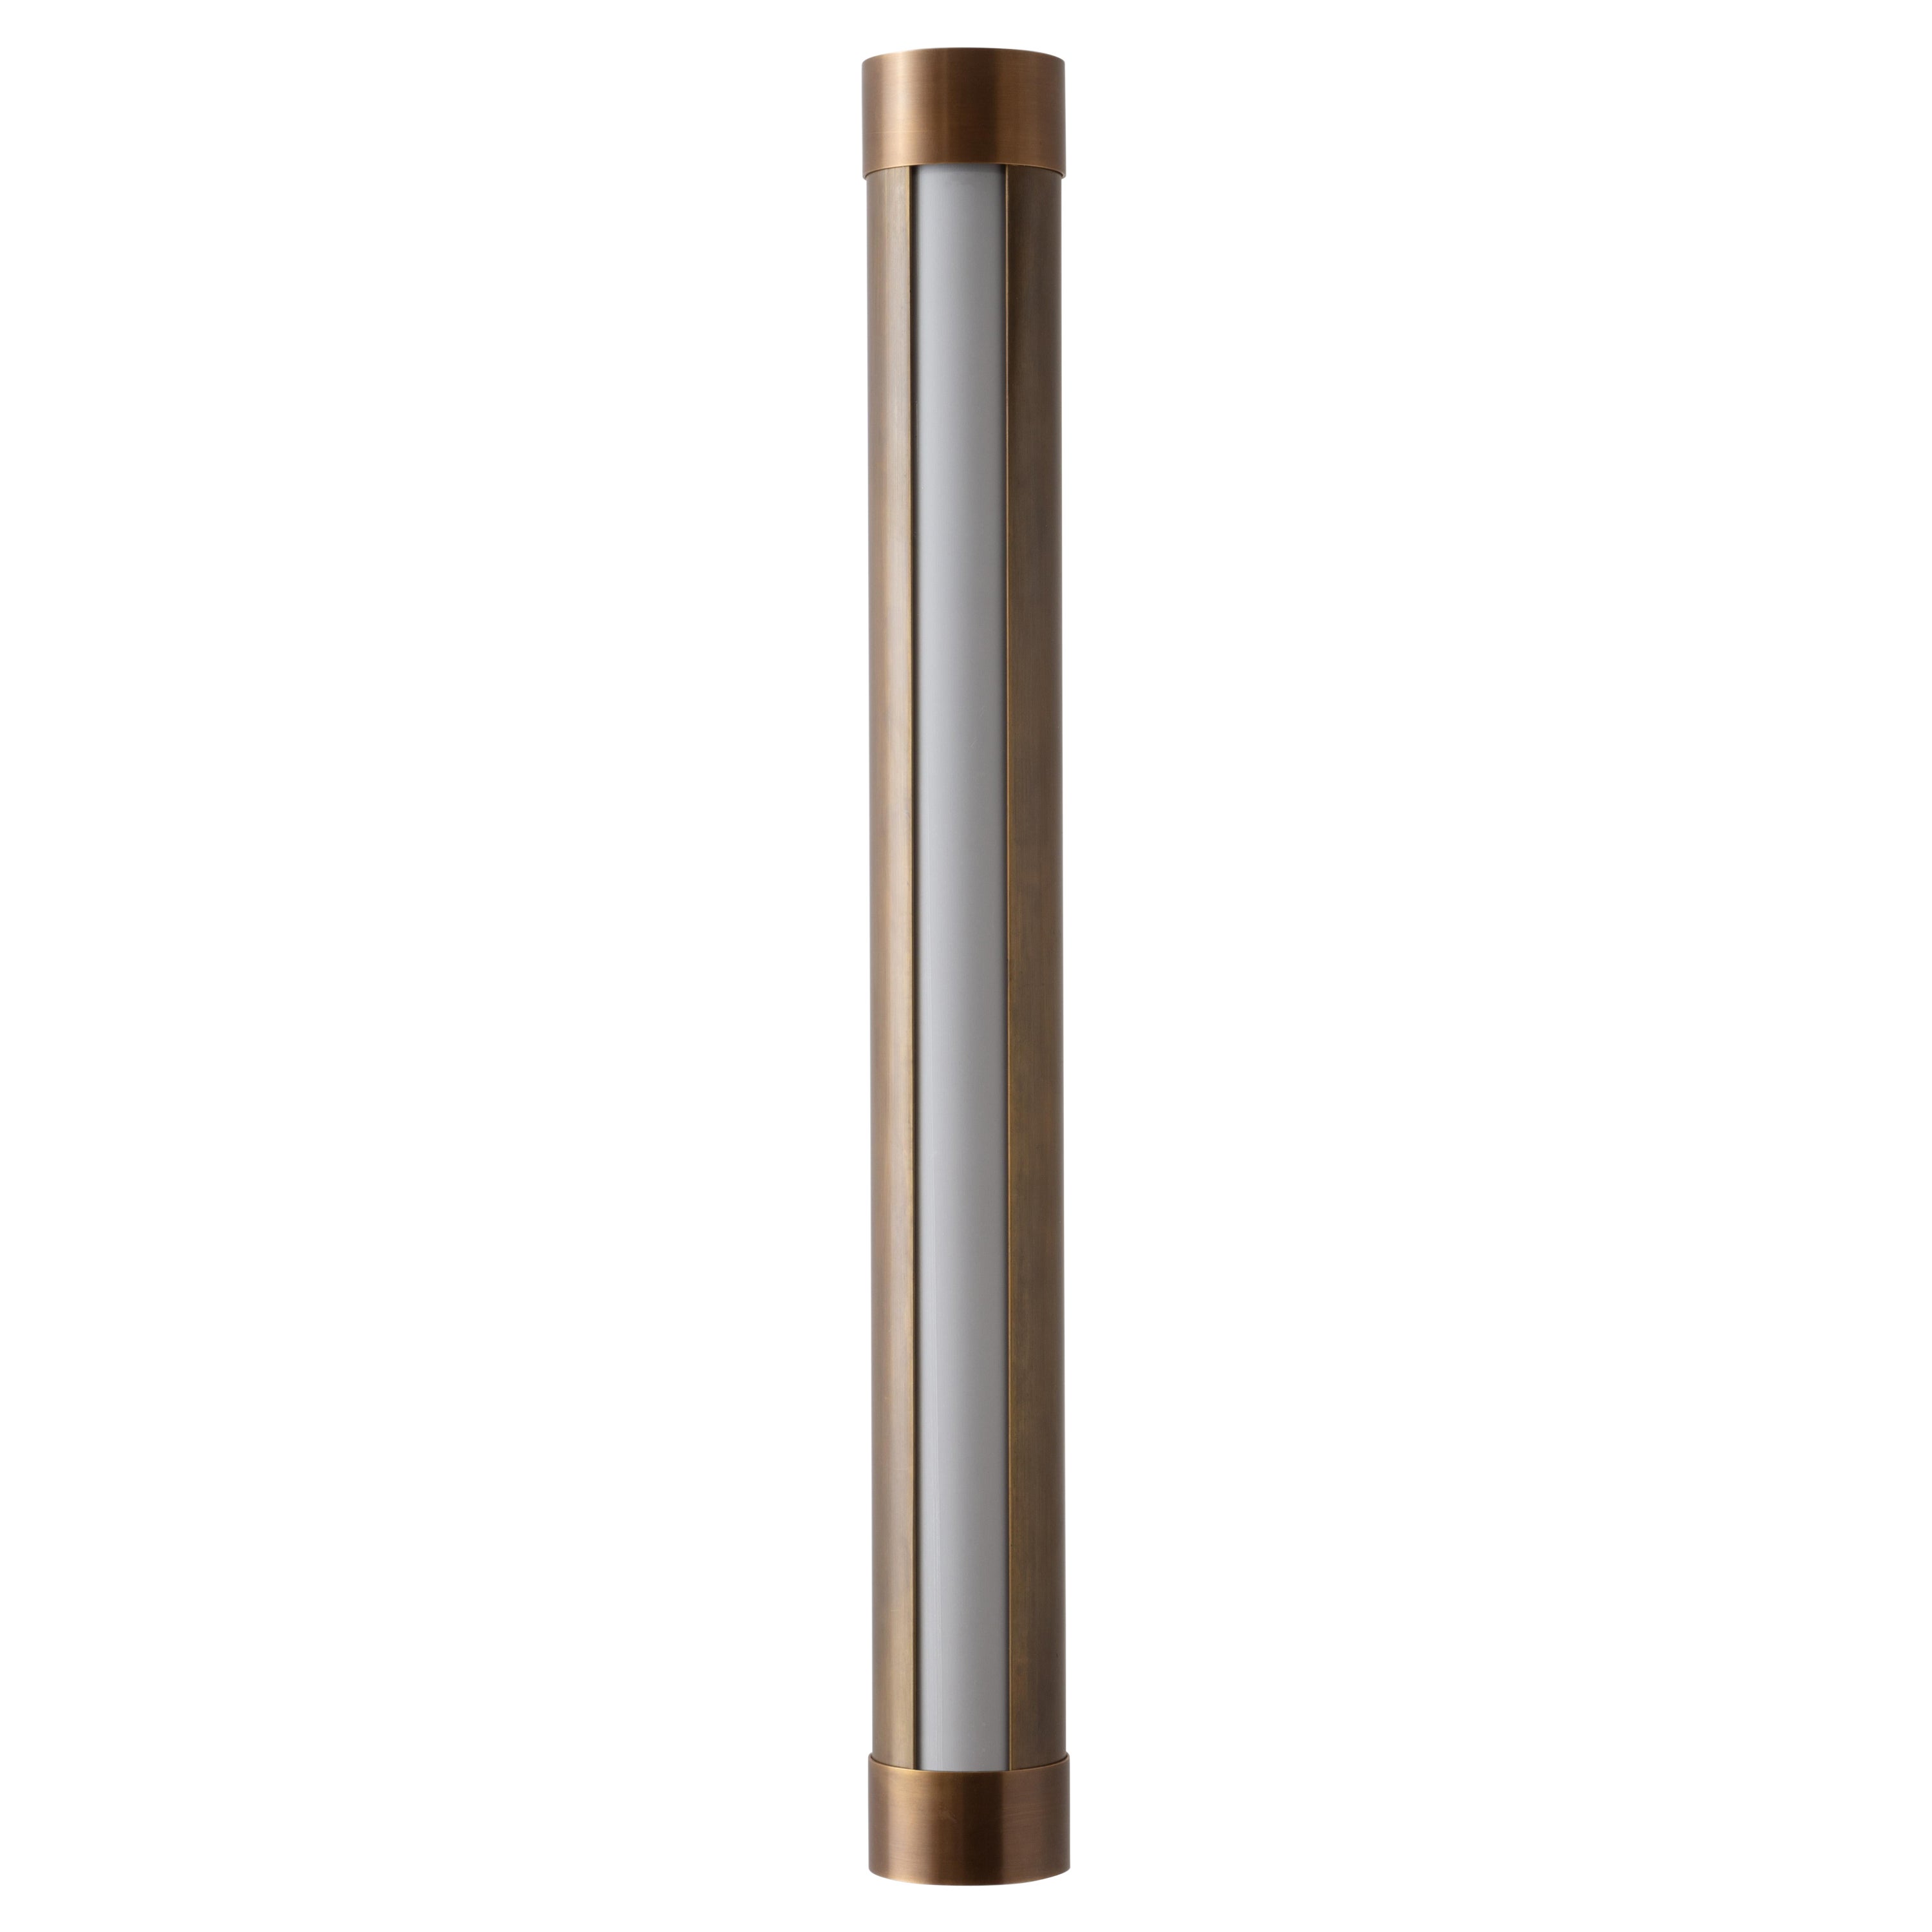 For Sale: Brown (Antique Brass) To and Fro Sconce Contemporary Minimalist LED Linear Vanity Sconce, UL